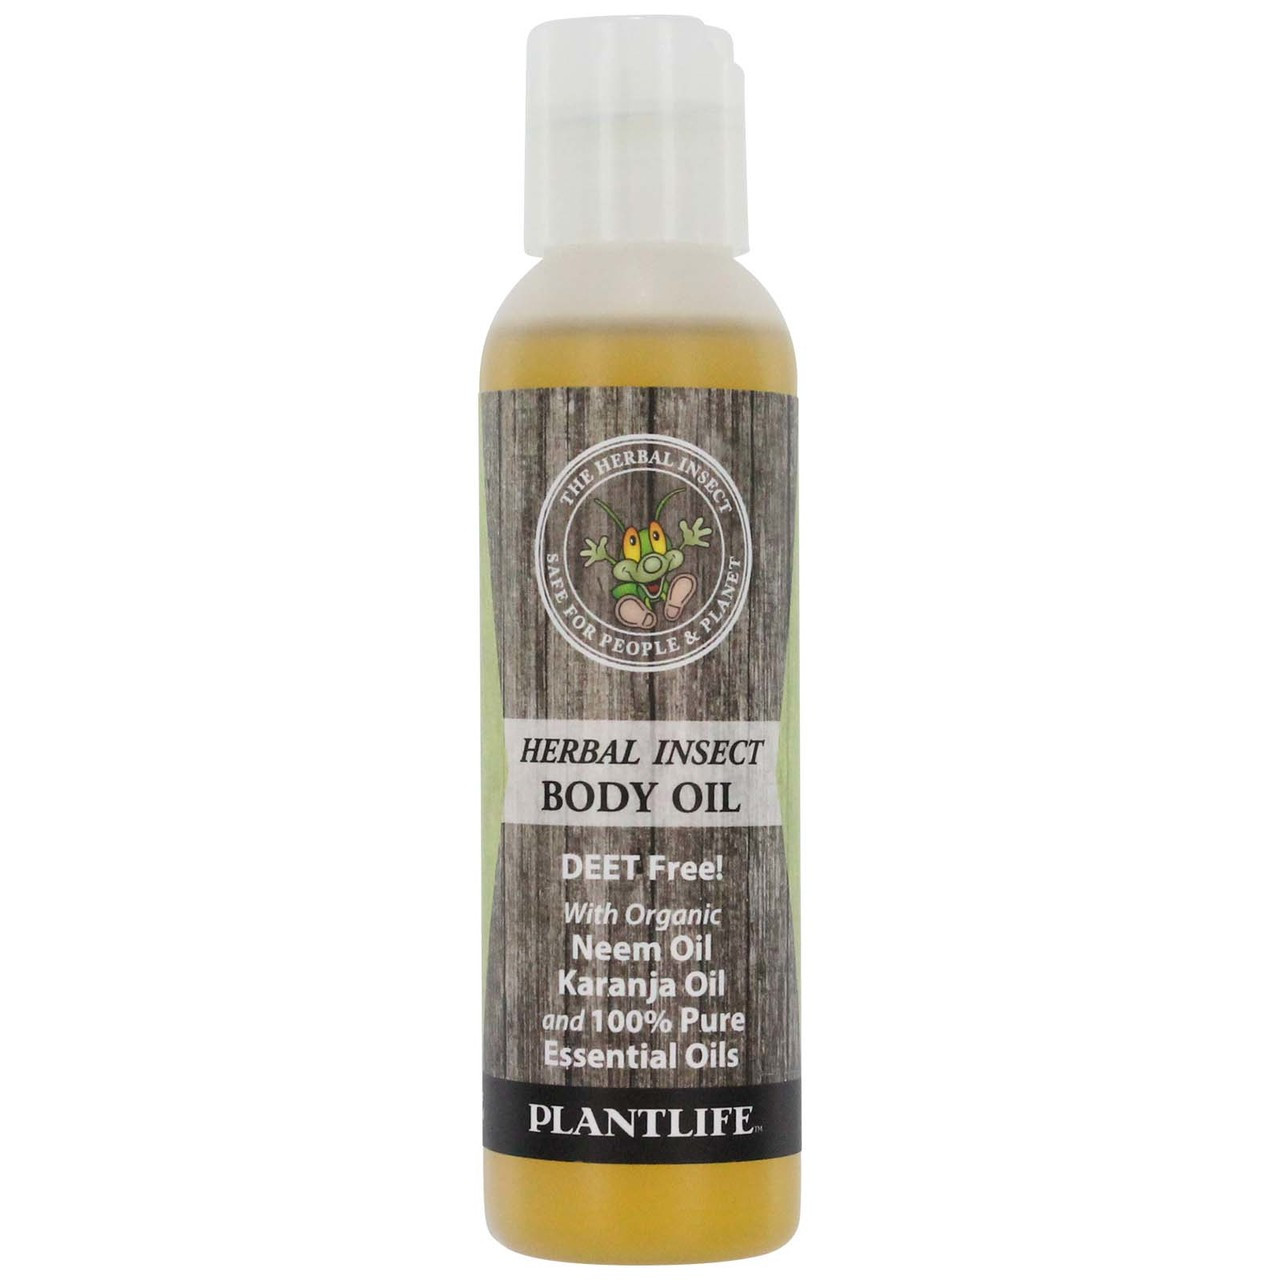 Plantlife Herbal Insect Body Oil